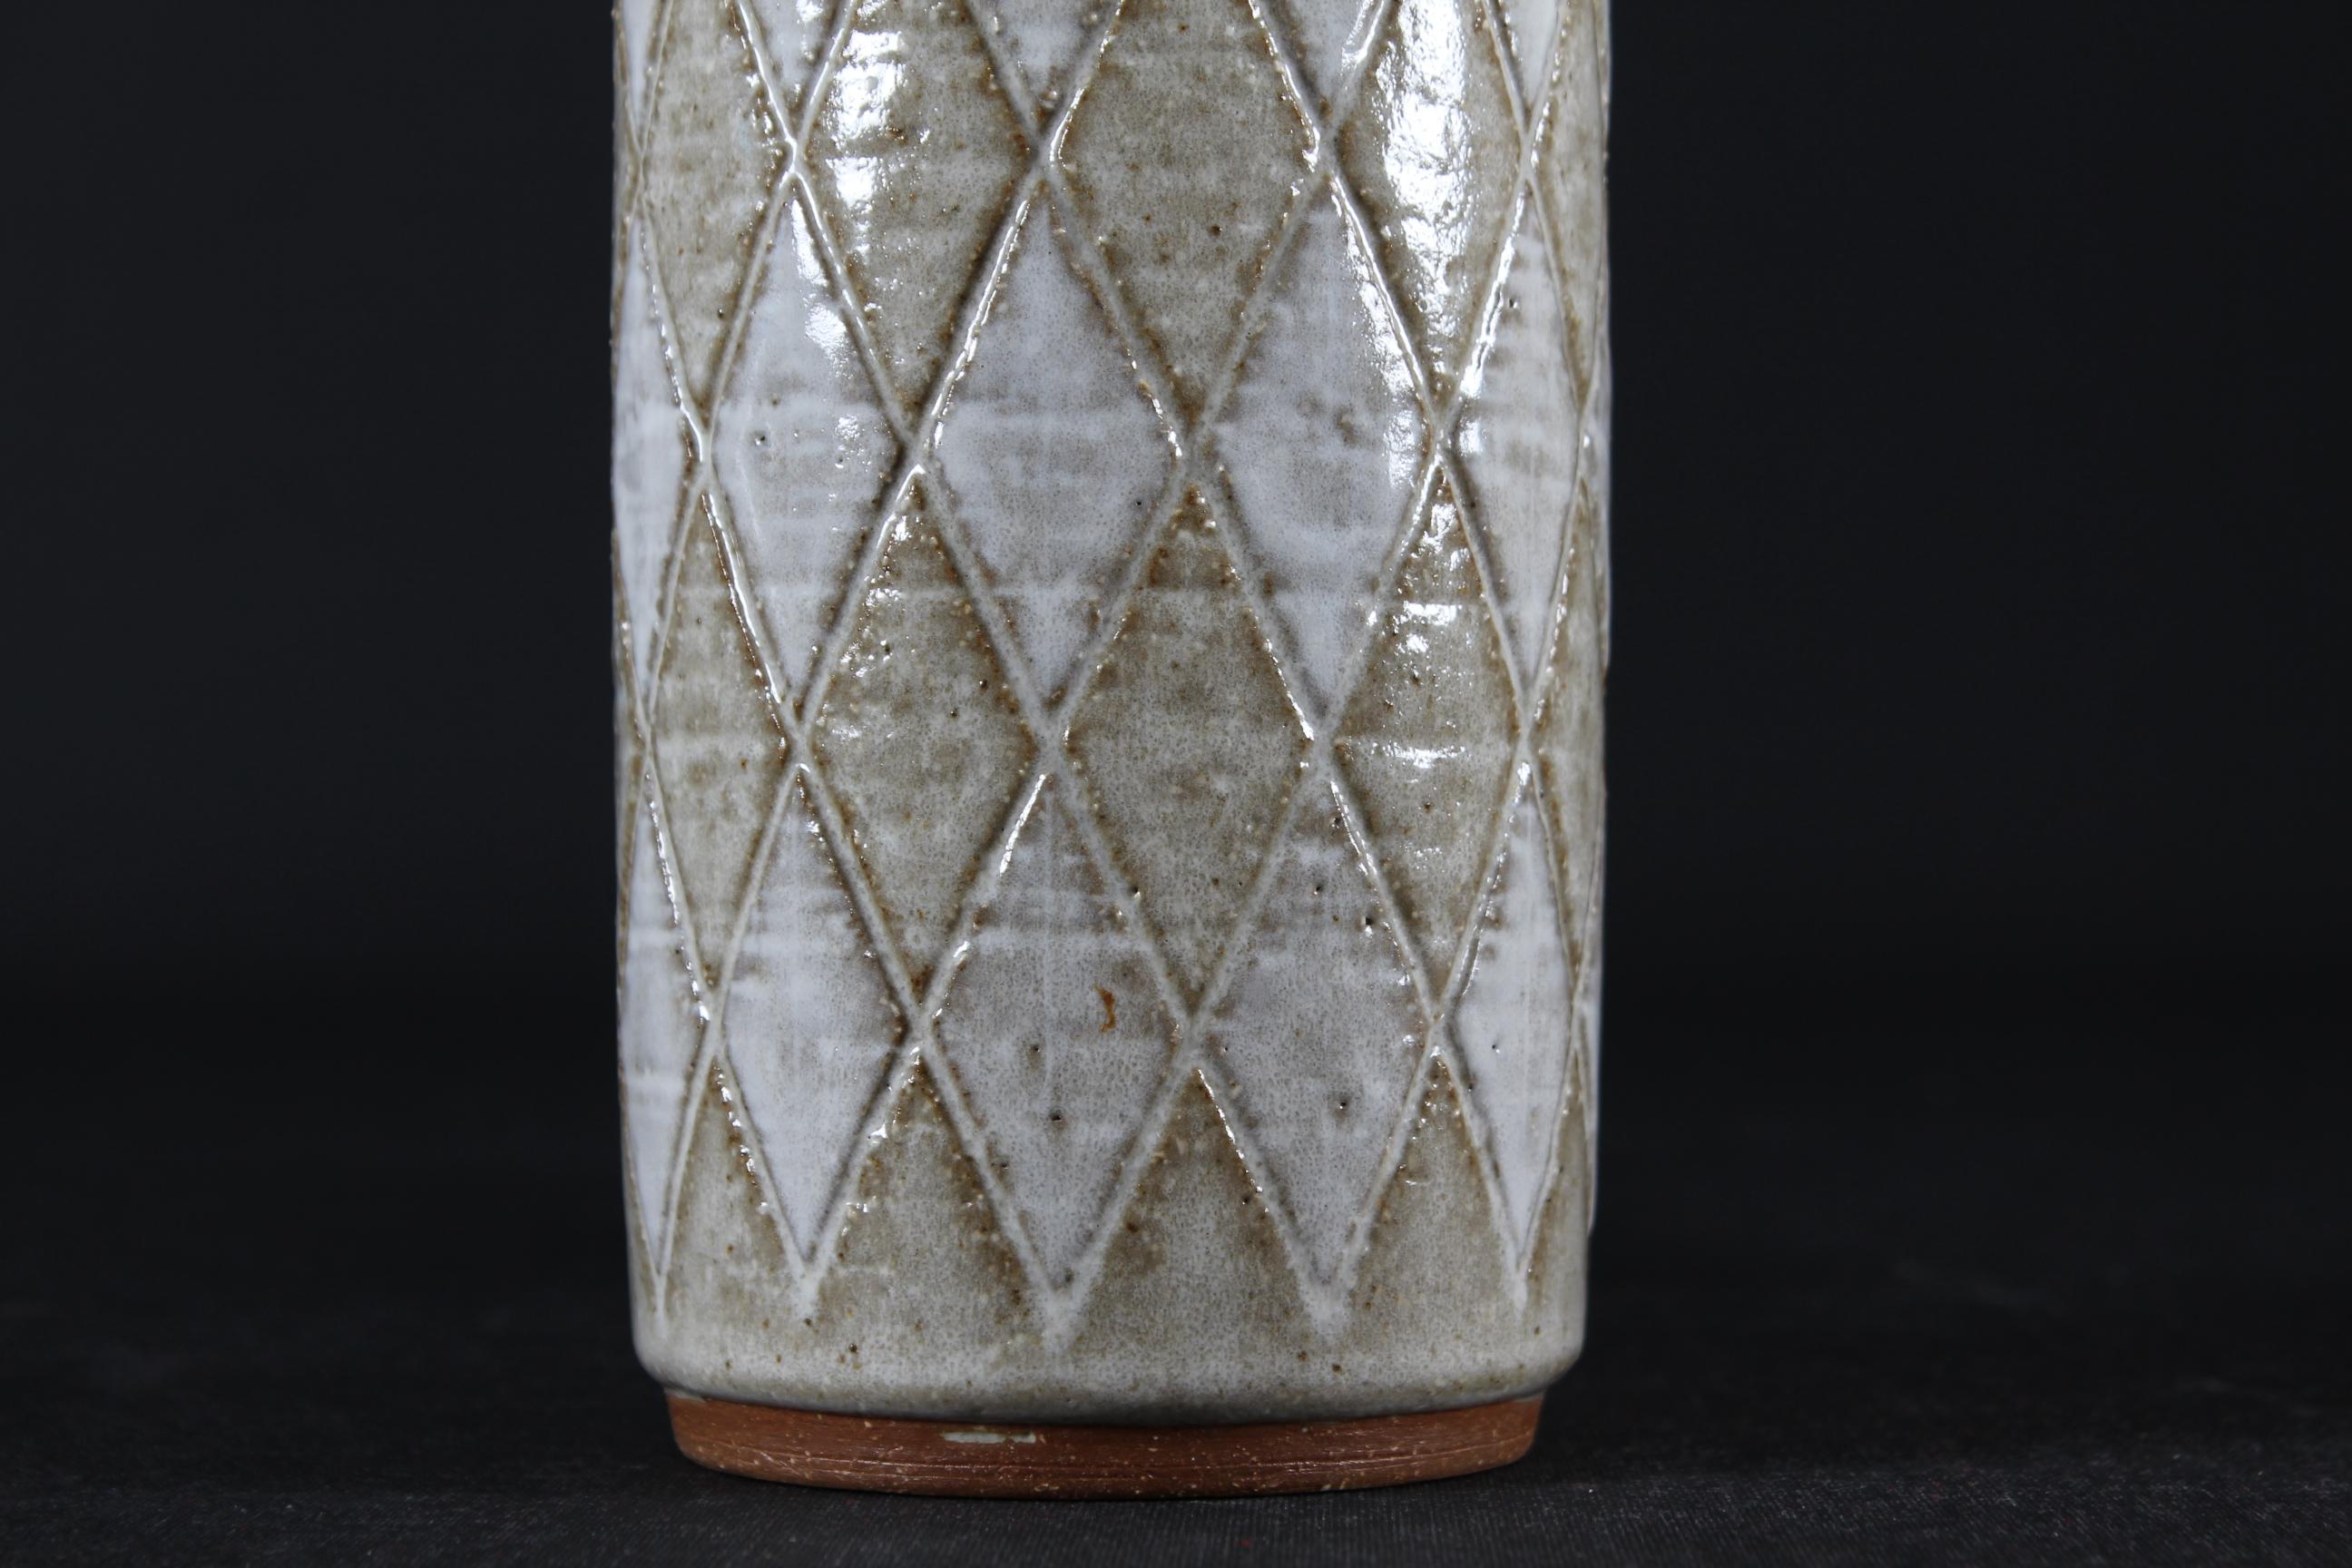 Per Linnemann-Schmidt Slender mid-century table lamp made by Danish Palshus Ceramic workshop in the 1960s.
It is made of chamotte clay which gives a rough and vivid surface. The glaze is white and beige in Harlequin checkered pattern.

Included